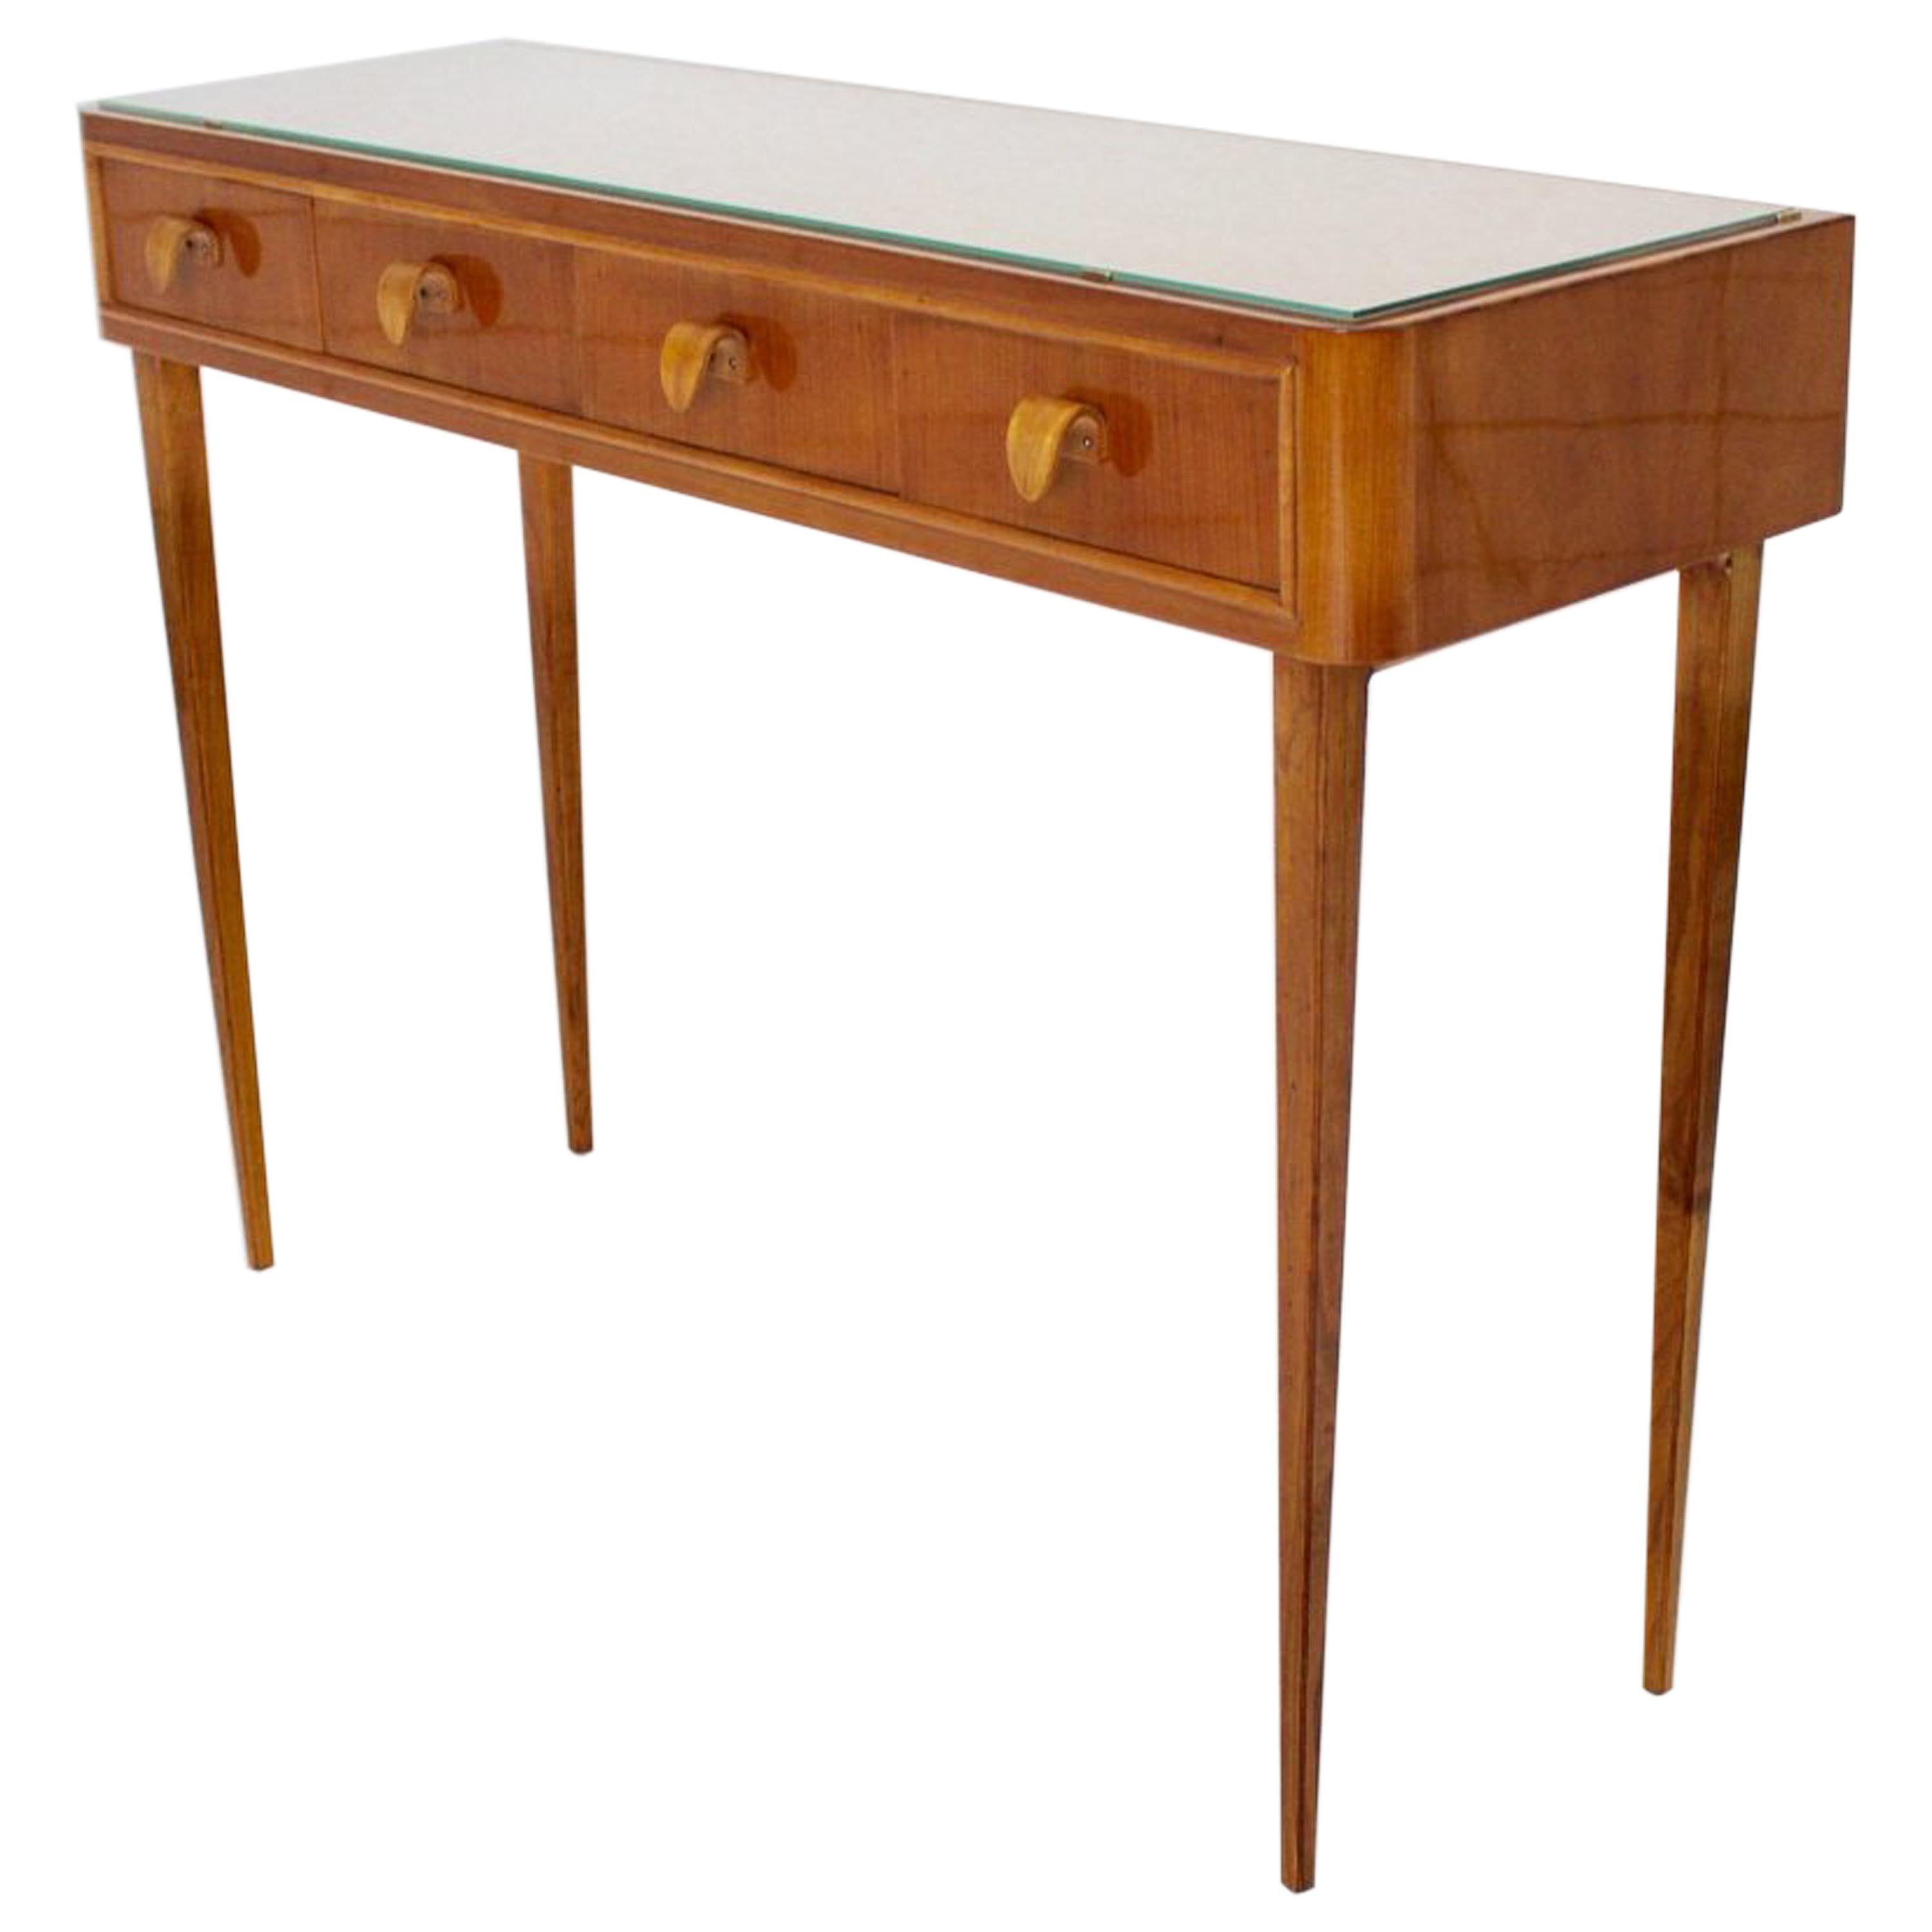 Mid-Century Modern Vintage Cherry Wood Commode Sideboard 1950s Italy For Sale